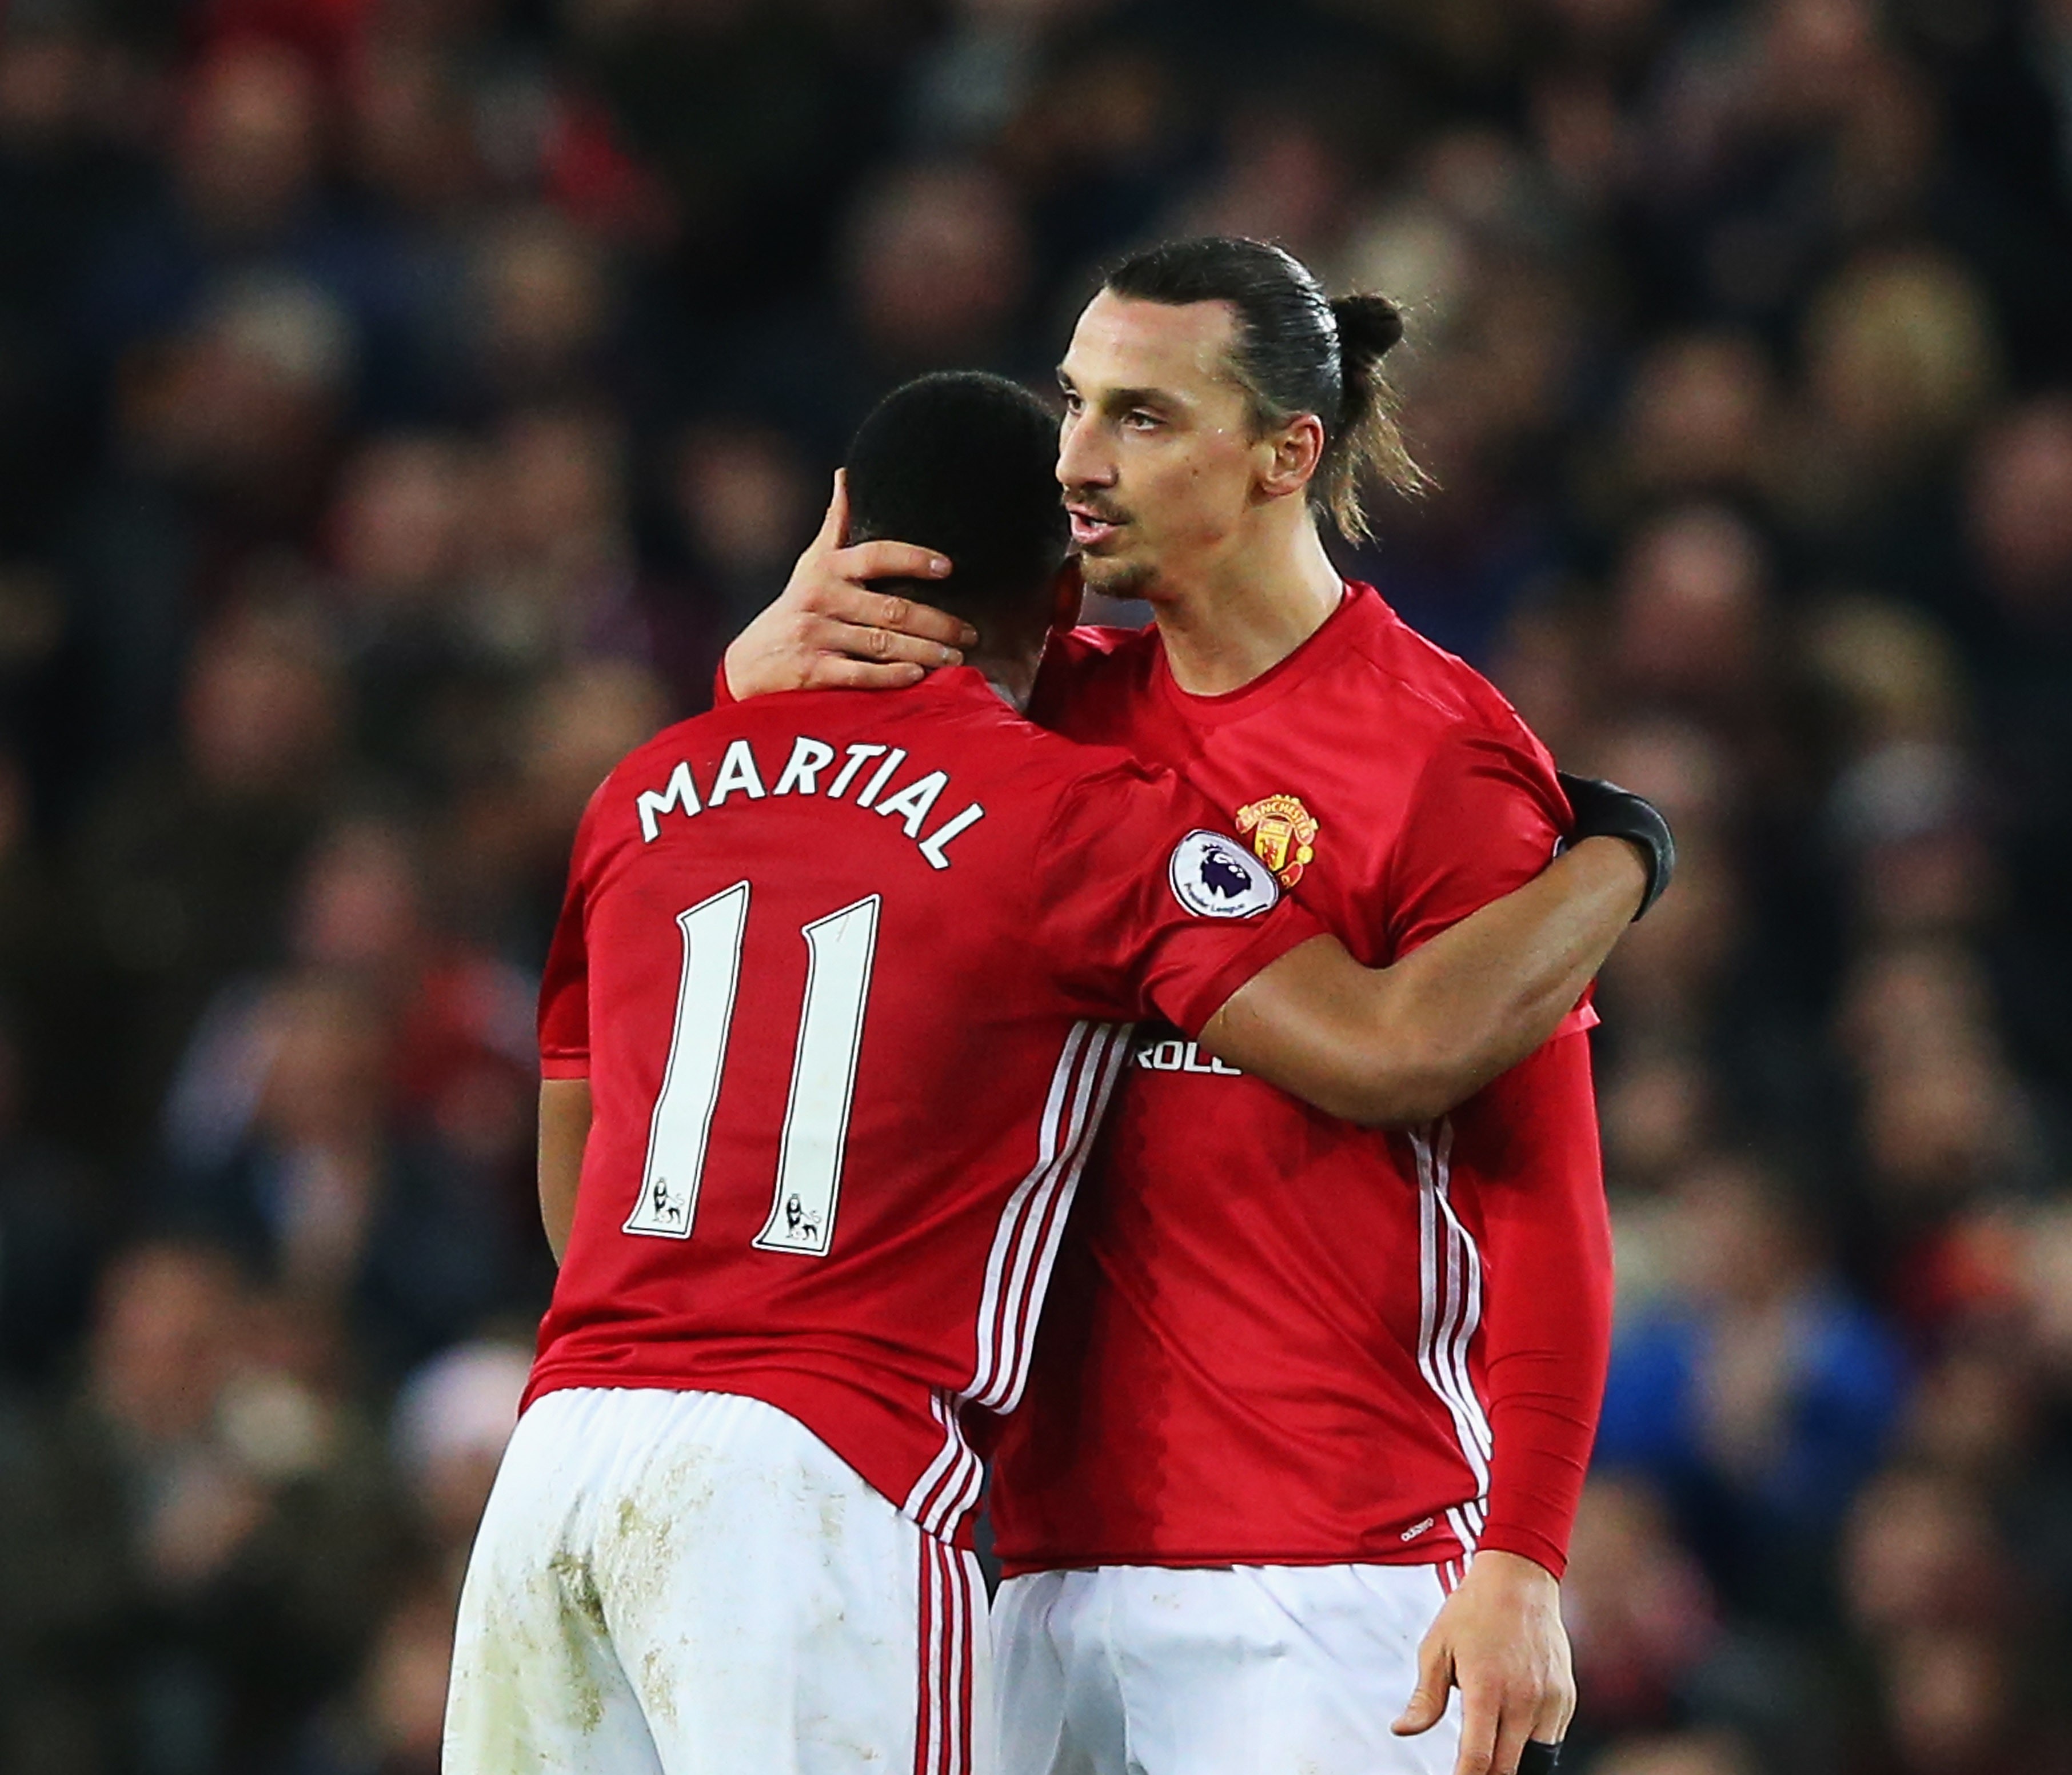 MANCHESTER, ENGLAND - DECEMBER 31:  Anthony Martial of Manchester United celebrates after he scores a goal with team mate Zlatan Ibrahimovic during the Premier League match between Manchester United and Middlesbrough at Old Trafford on December 31, 2016 in Manchester, England.  (Photo by Alex Livesey/Getty Images)